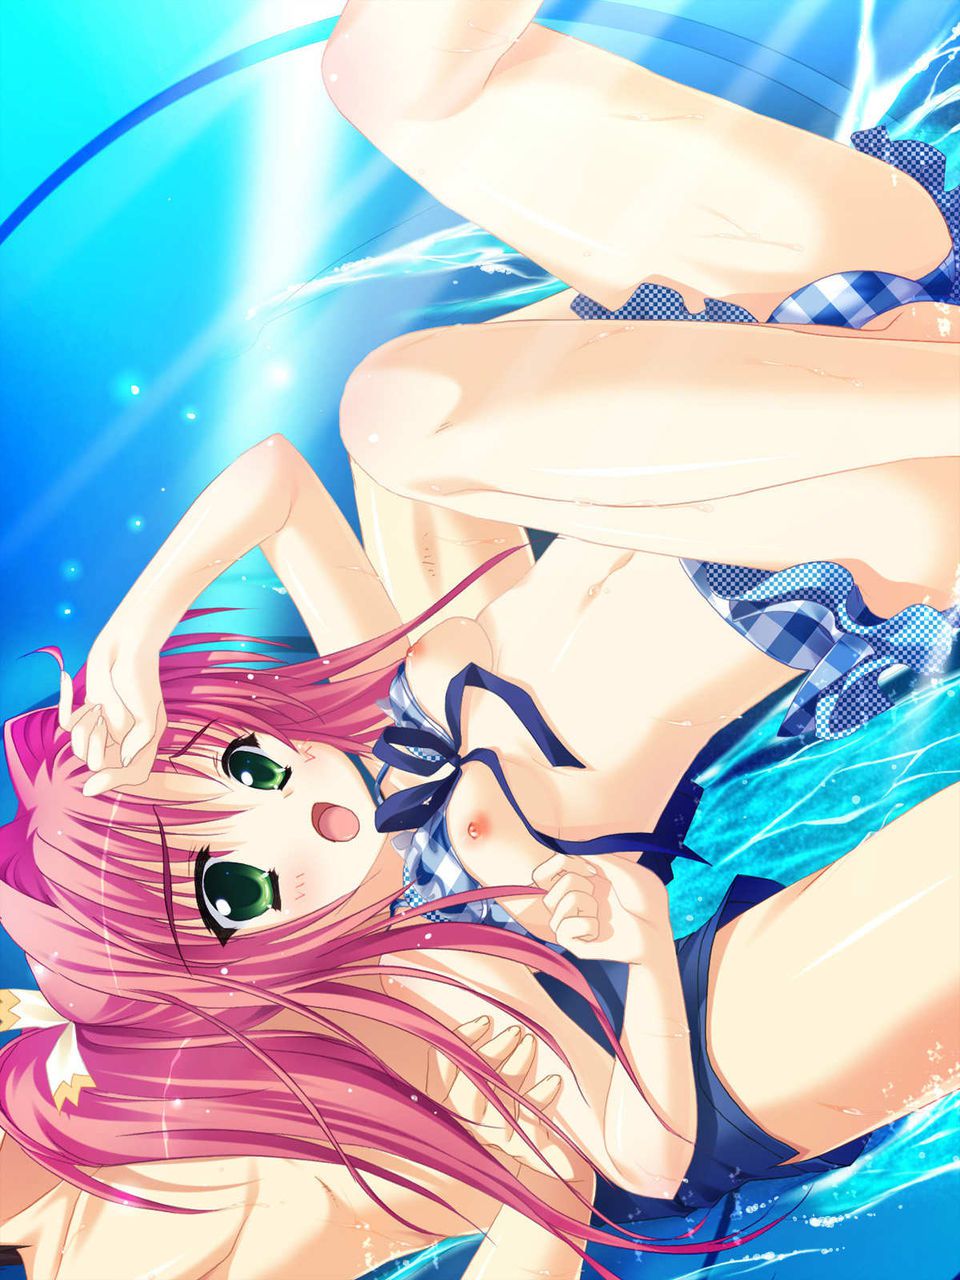 [secondary swimsuit] without losing the guerrilla thunderstorm, I'm collecting erotic pictures of beautiful girl swimsuit ~? Part2 3